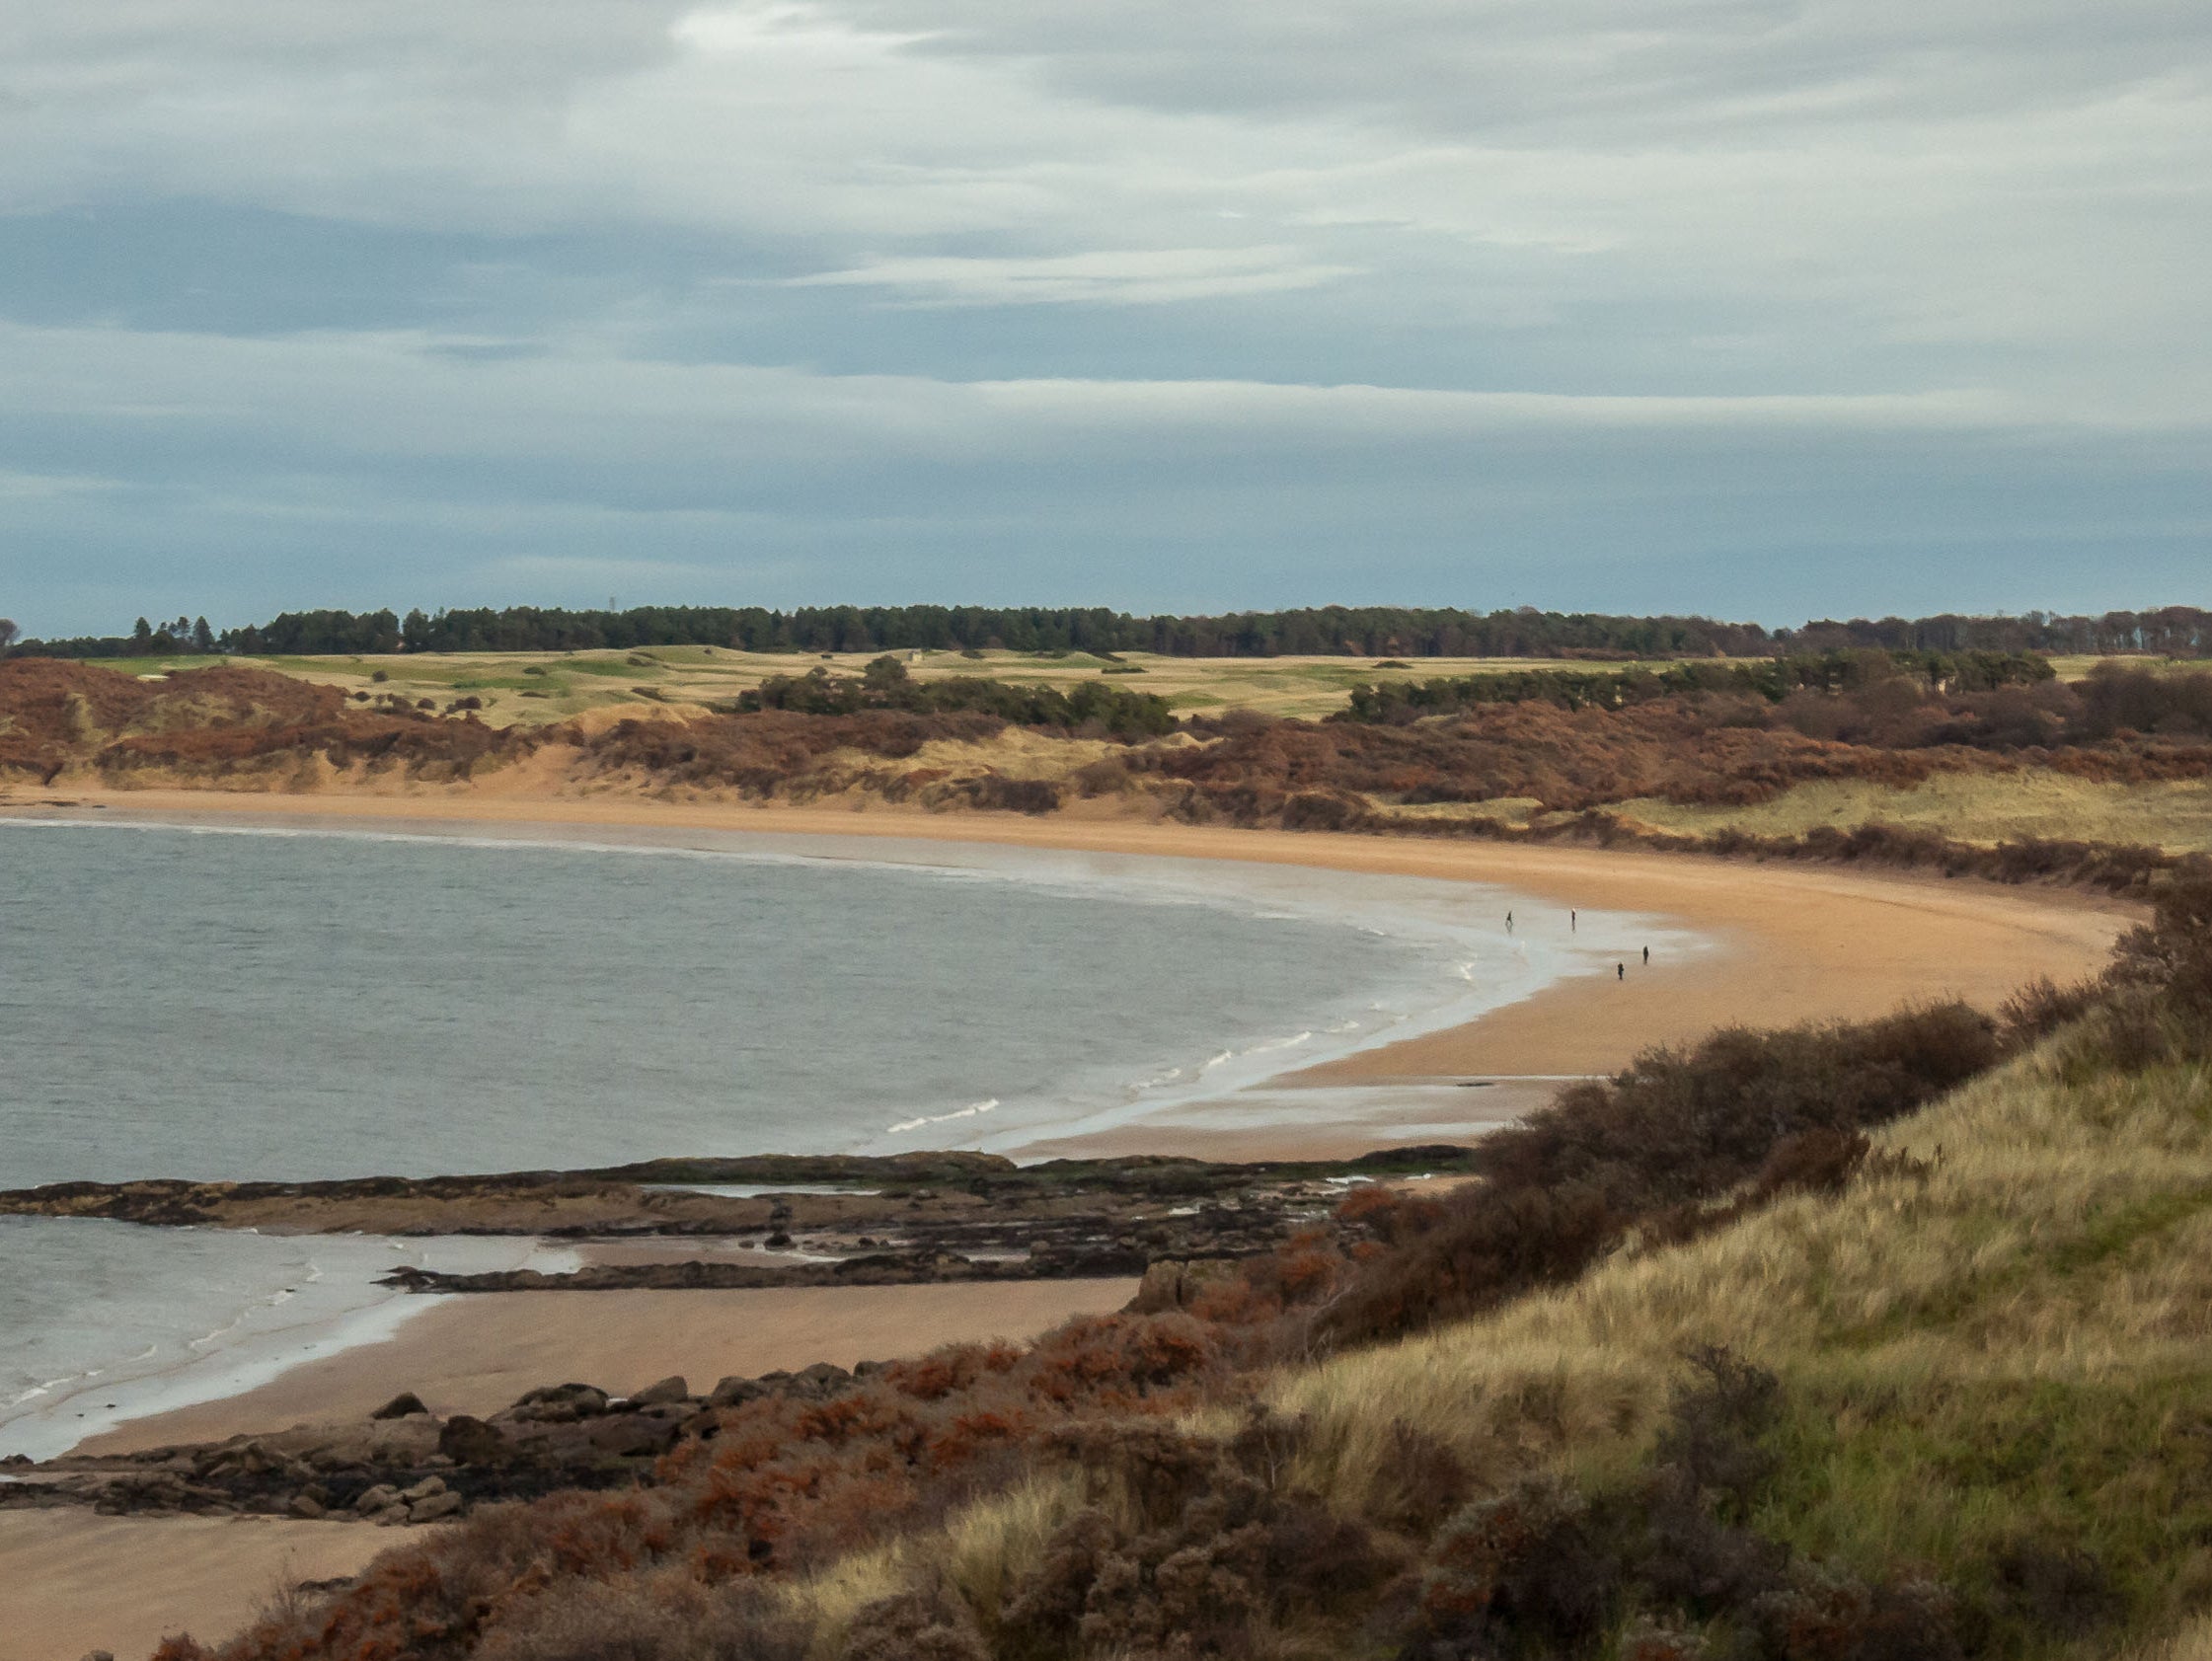 Situated in a nature reserve, this horseshoe-shaped beach is perfect for birdwatching